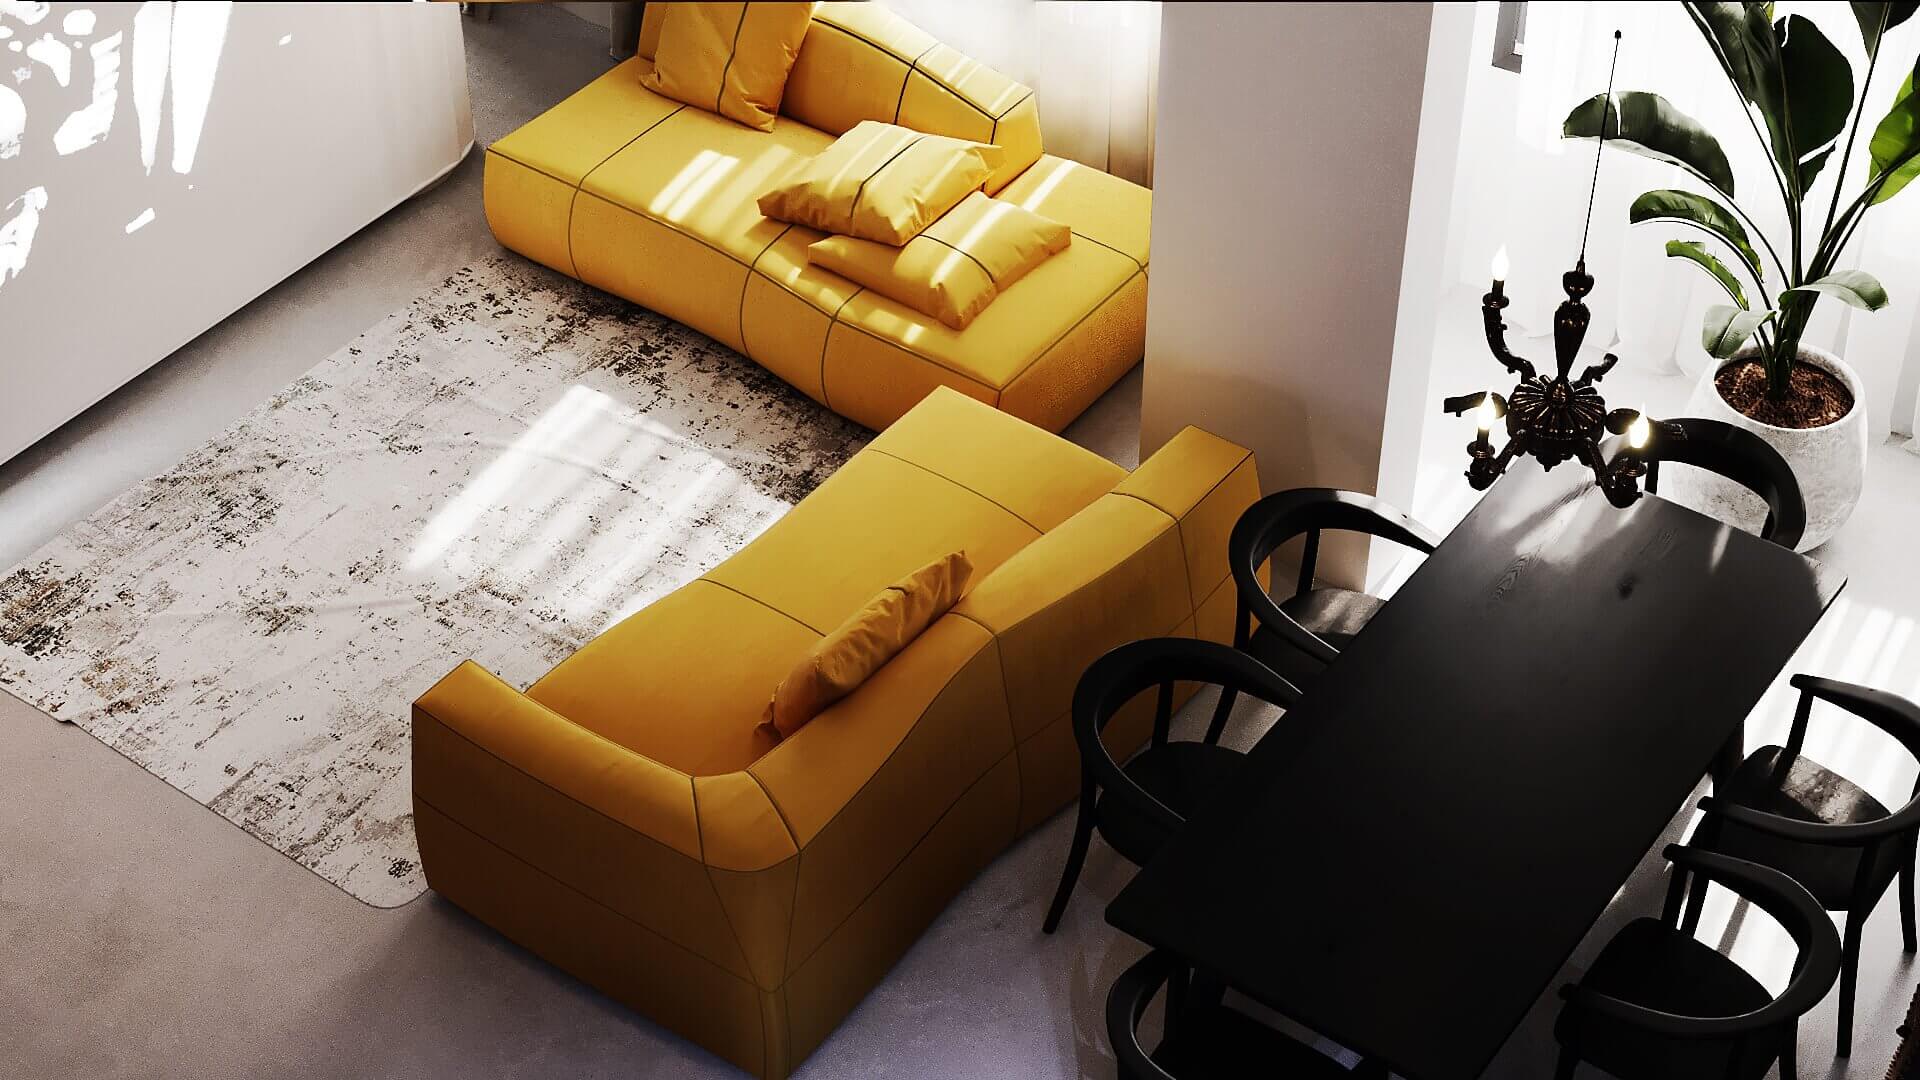 Oasis Apartment living room yellow fabric couch - cgi visualization